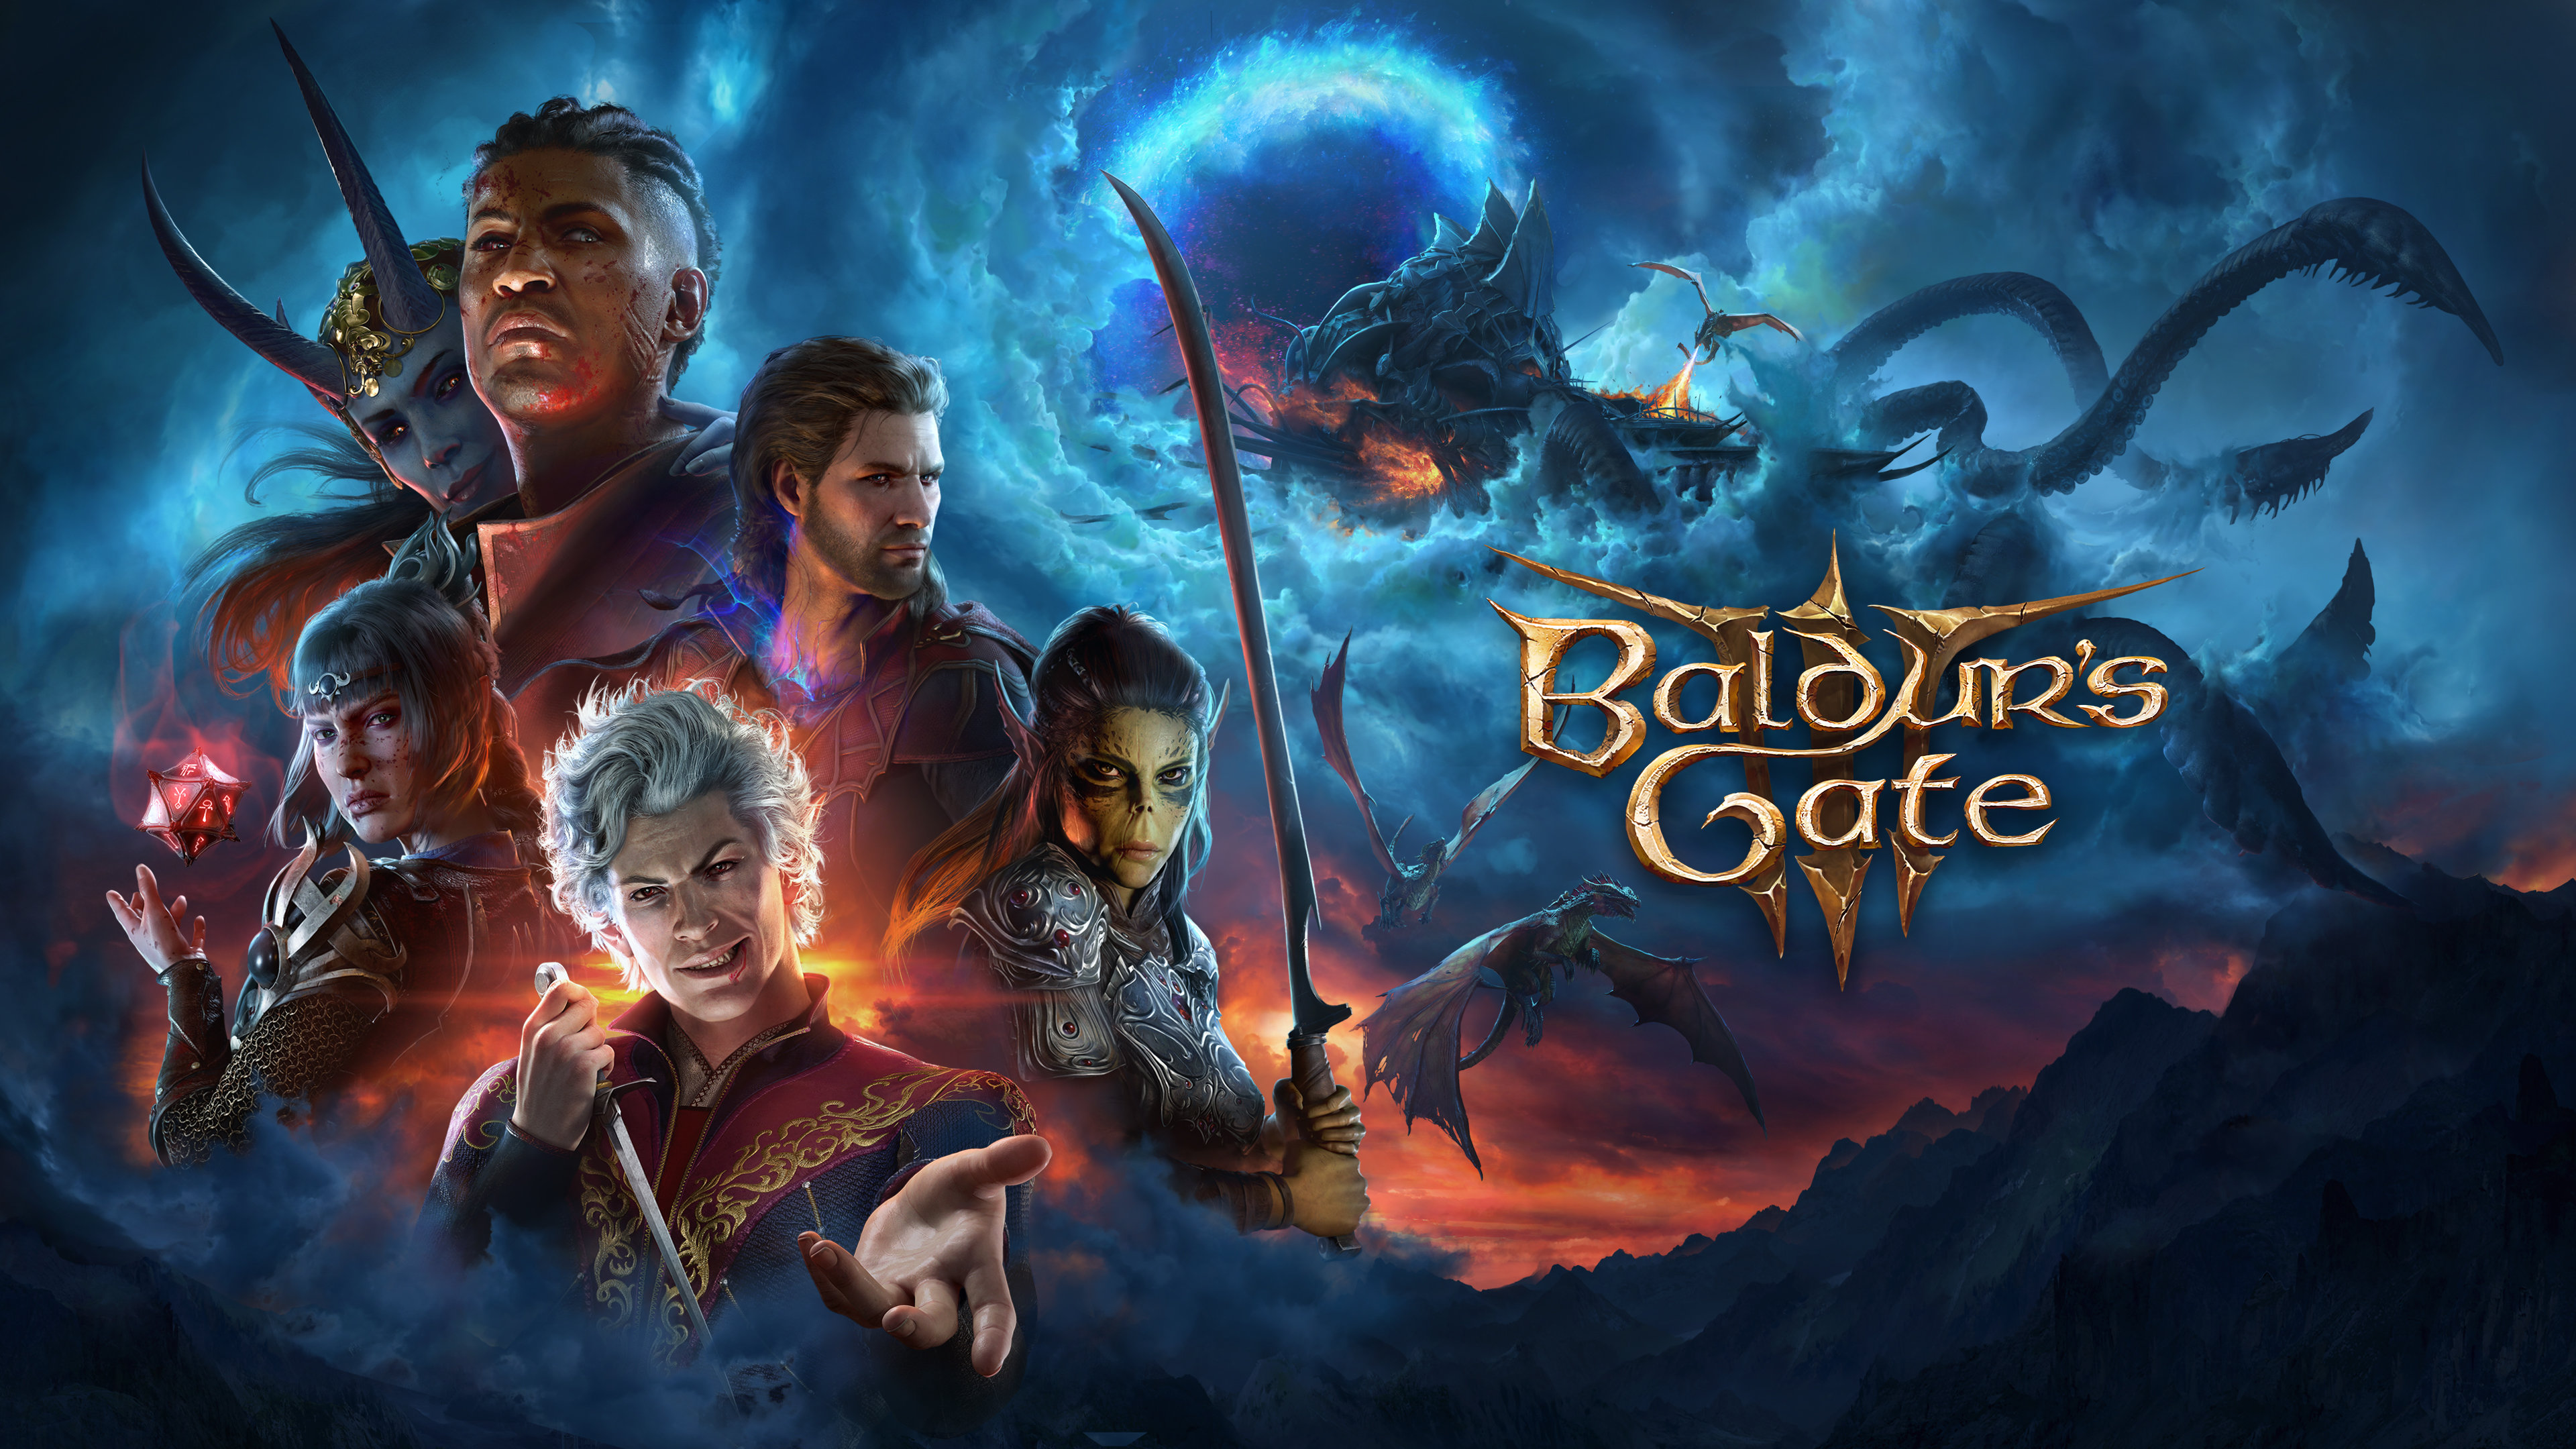 Key art for Baldur’s Gate 3, developed by Larian Studios. It shows multiple classes of characters juxtaposed near each other on an ethereal blue background.